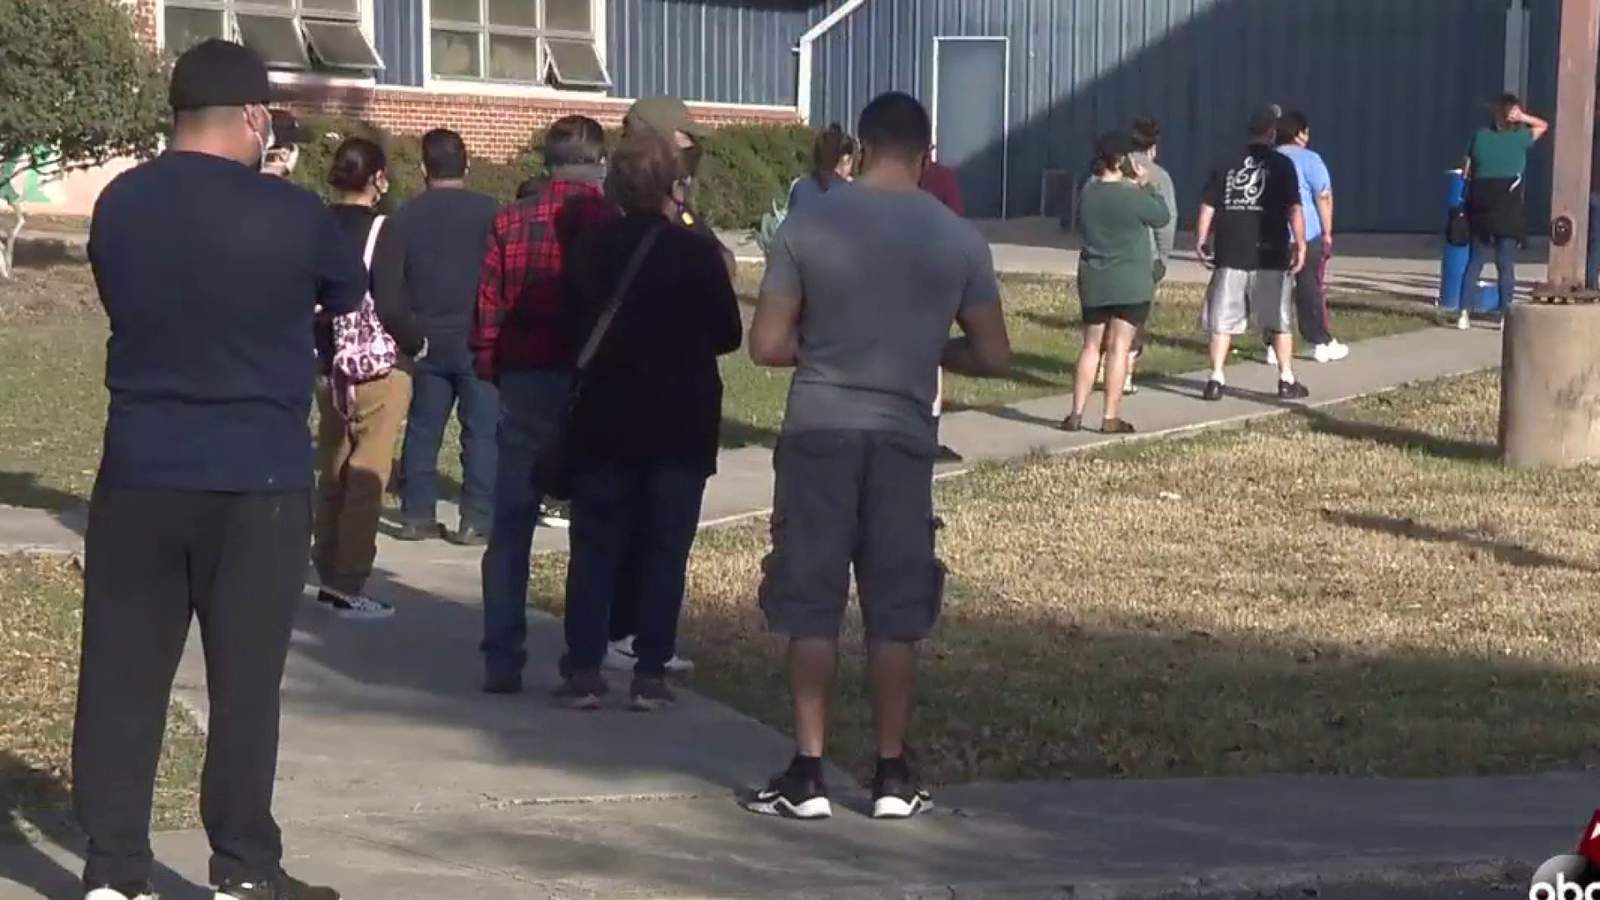 Long lines at San Antonio asymptomatic testing sites encouraging to city, medical workers